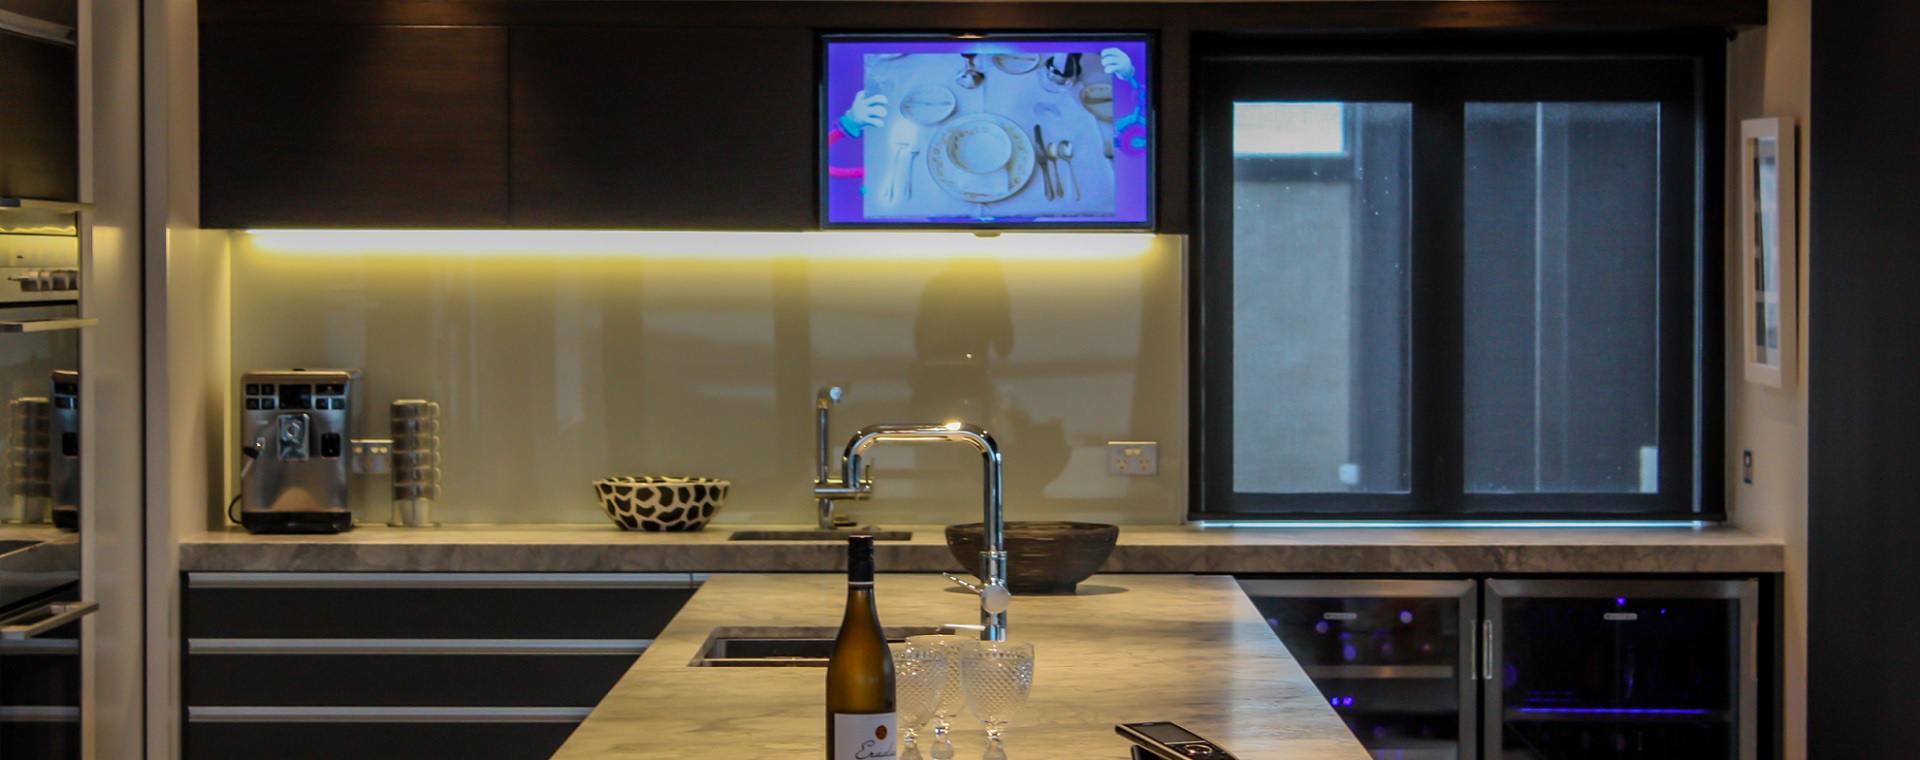 Modern kitchen with TV screen in cabinetry over bench controlled through home automation remote on bench